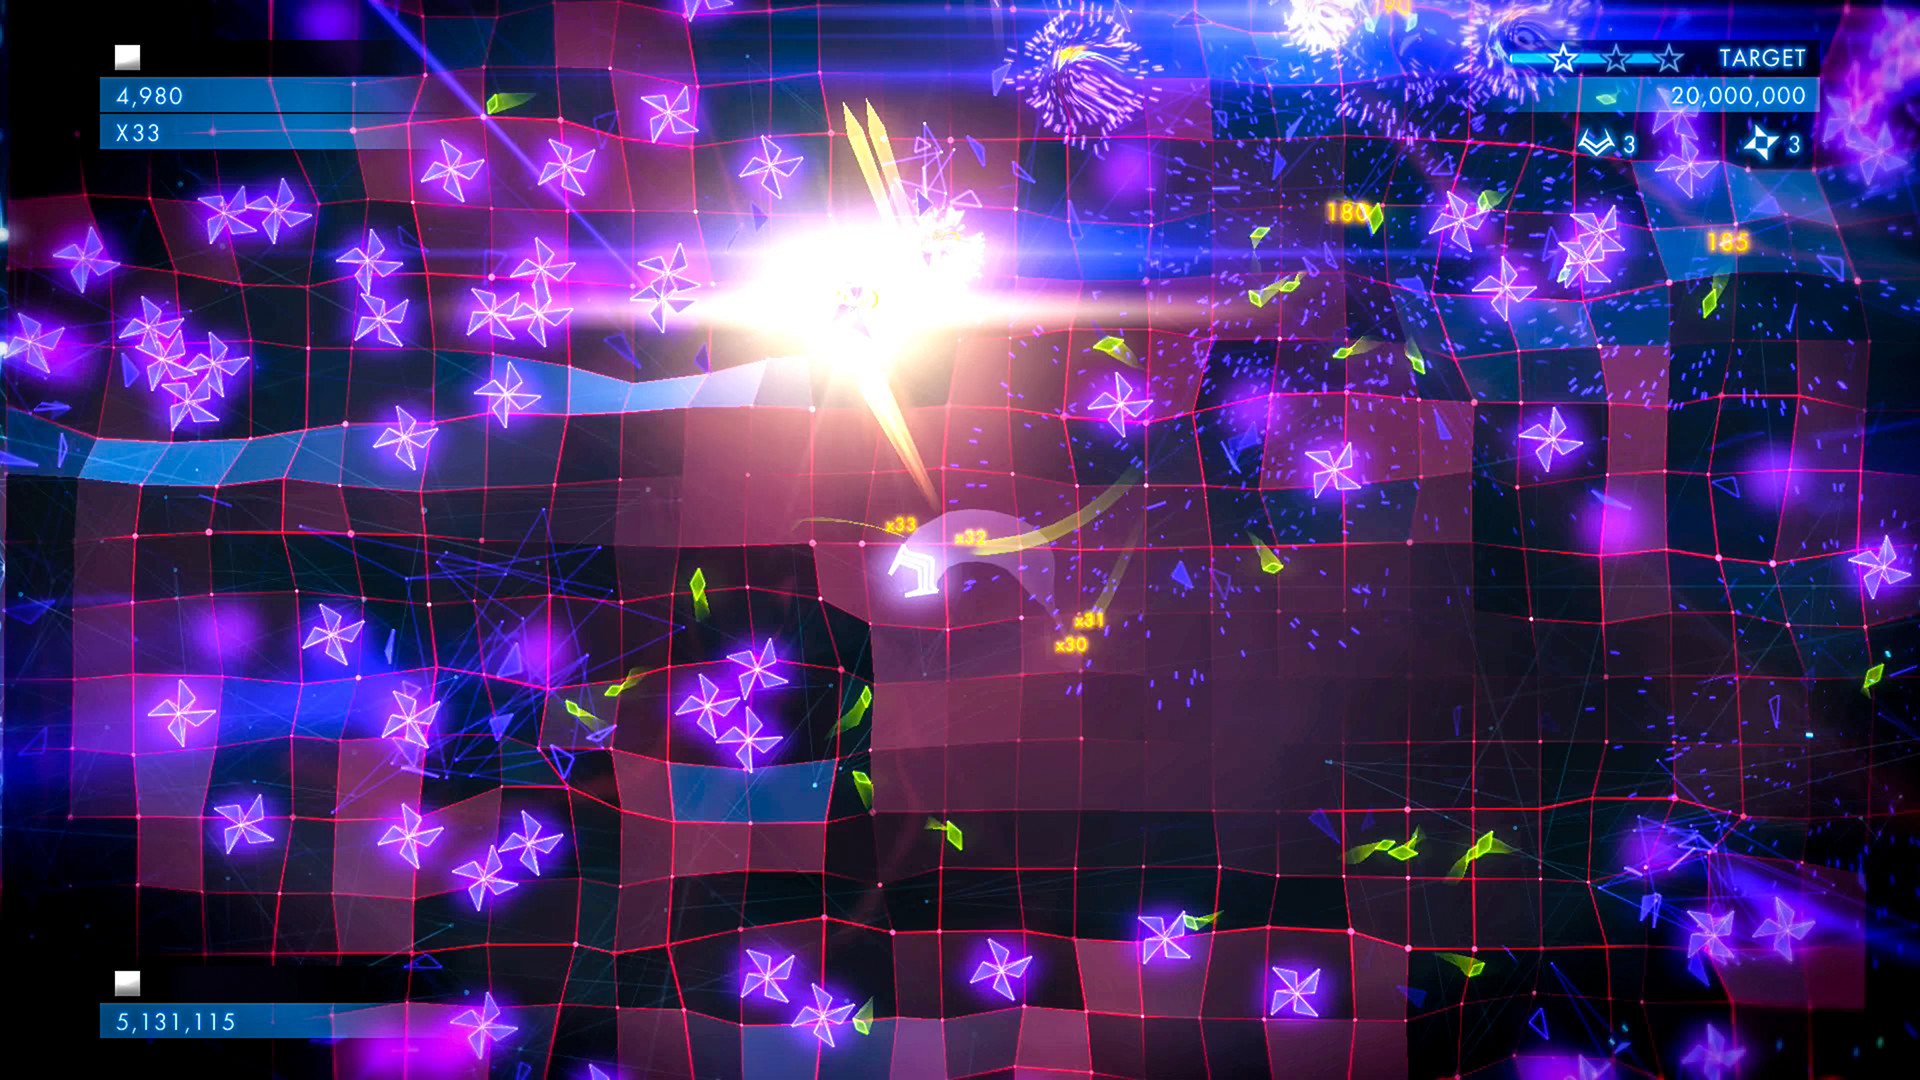 geometry wars 3 dimensions evolved review